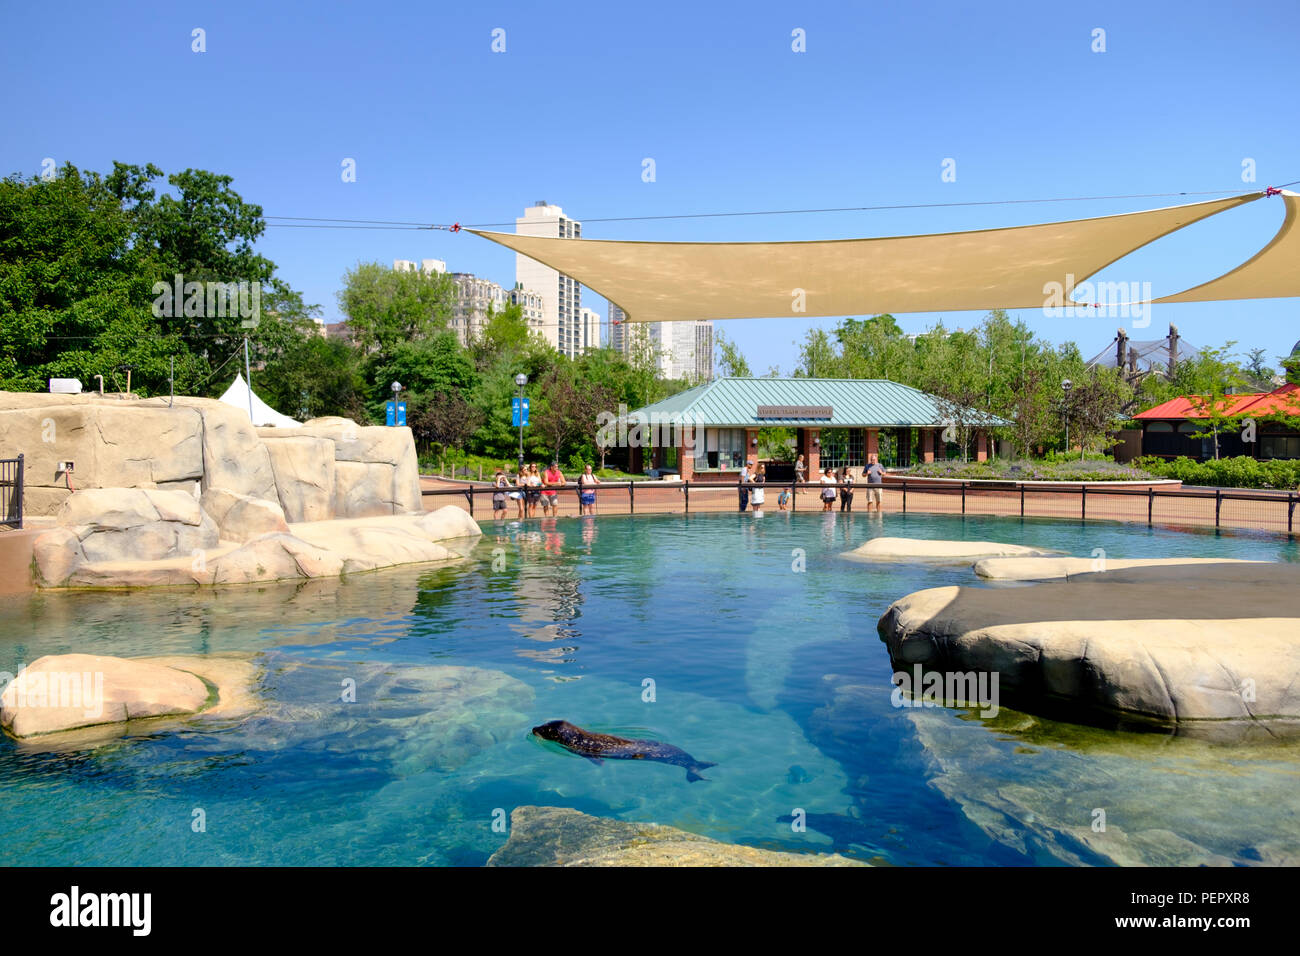 Kovler Seal Pool at Lincoln Park Zoo in Summer , Chicago, Illinois, USA Stock Photo